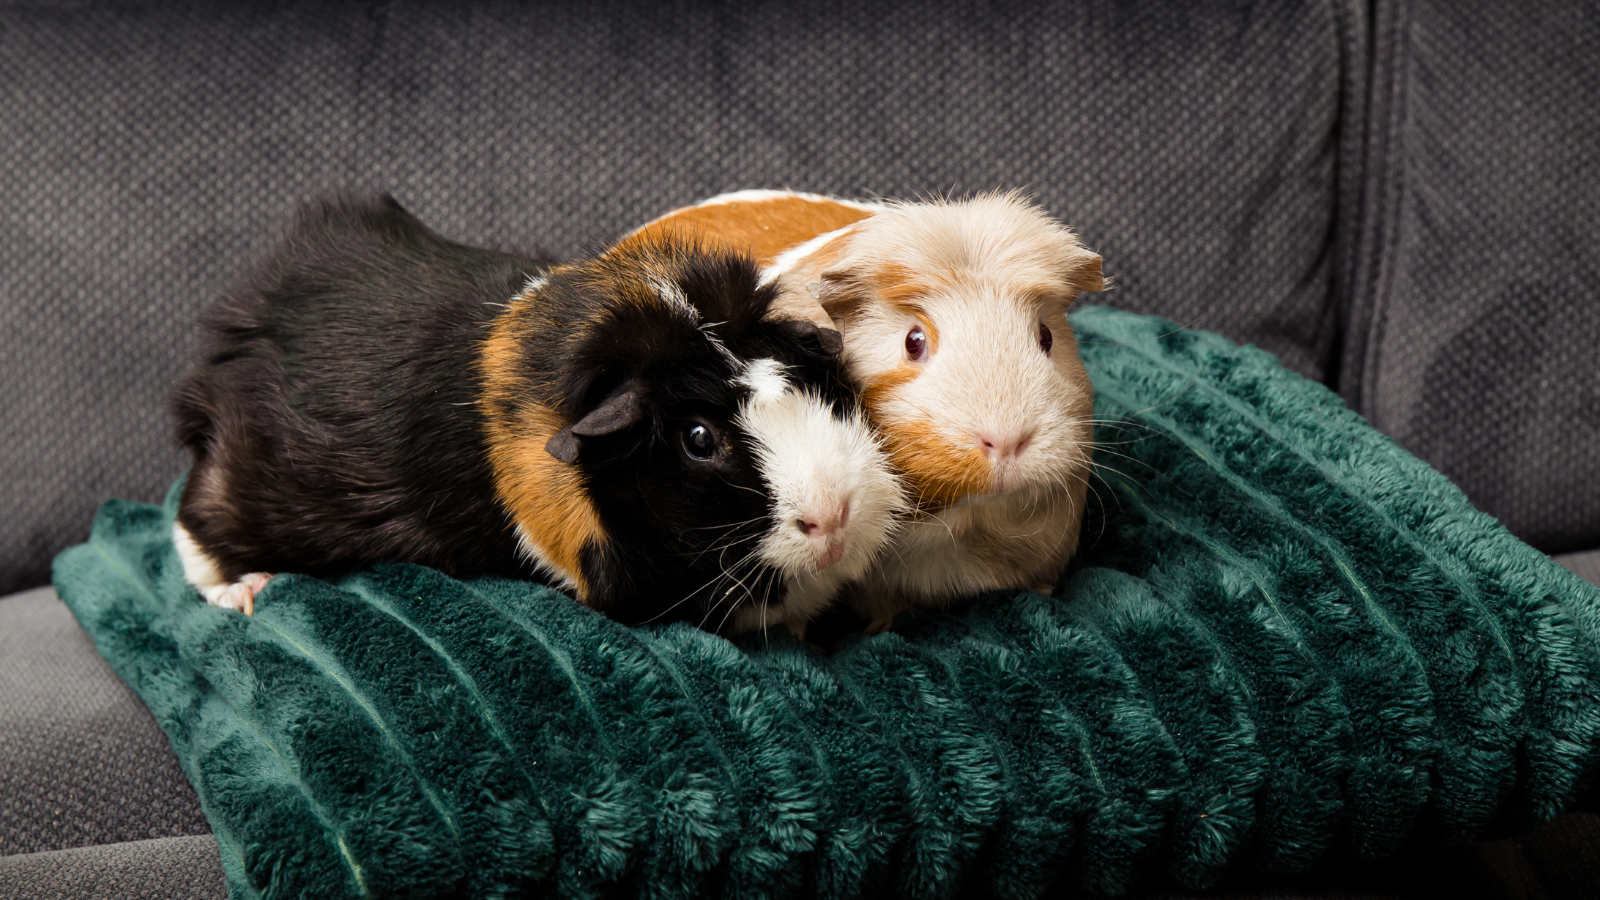 Two guinea pigs sitting on a blanket next to each other.